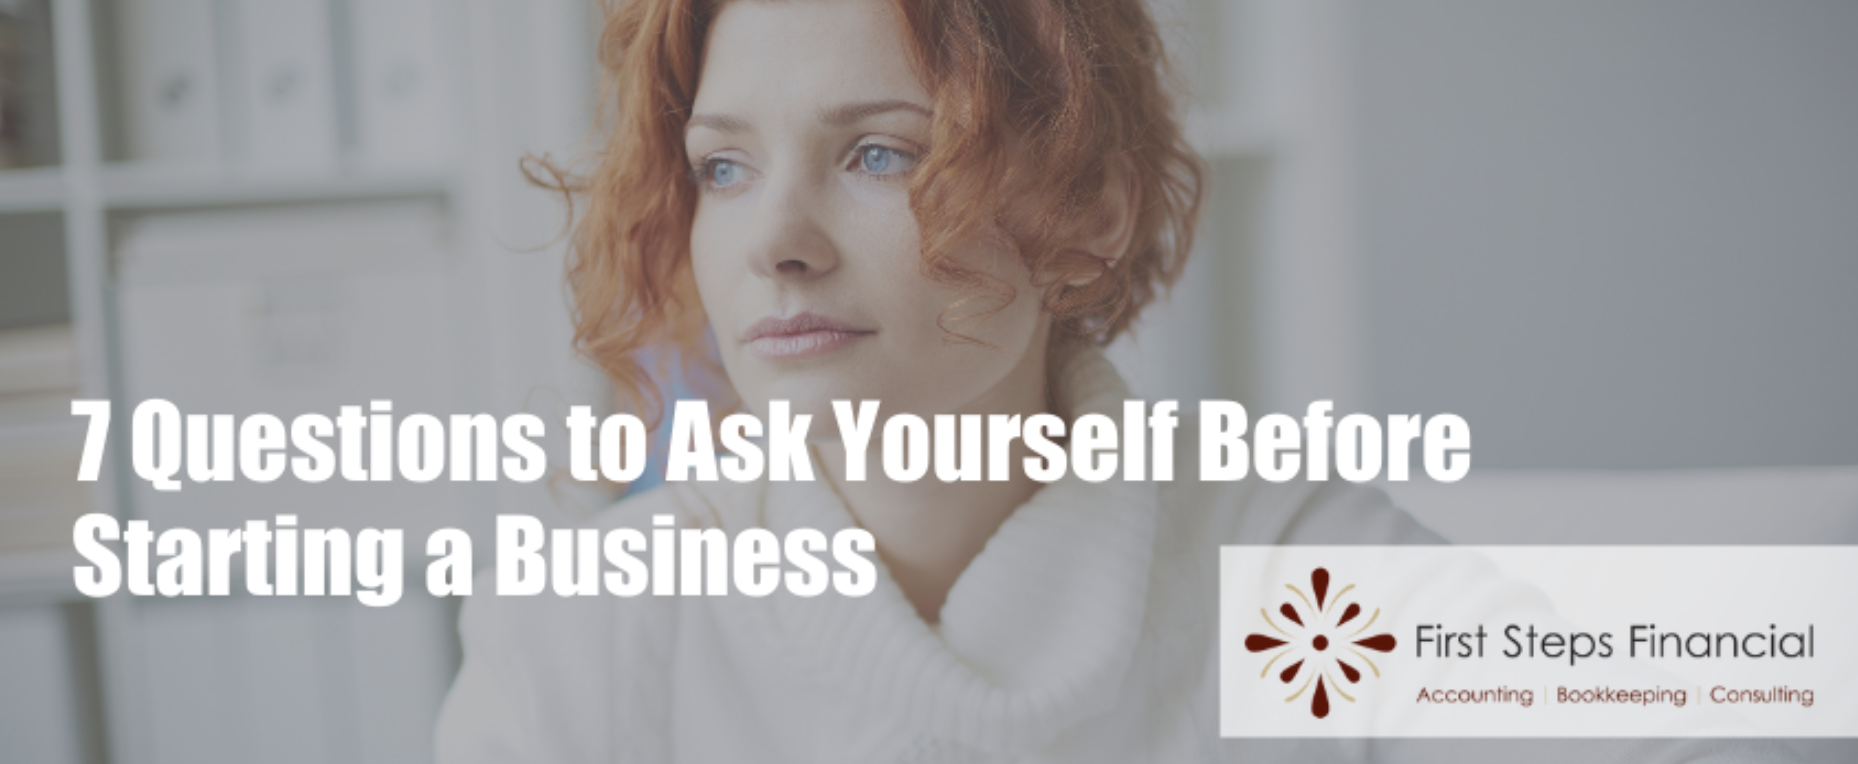 7 Questions to Ask Yourself Before Starting a Business